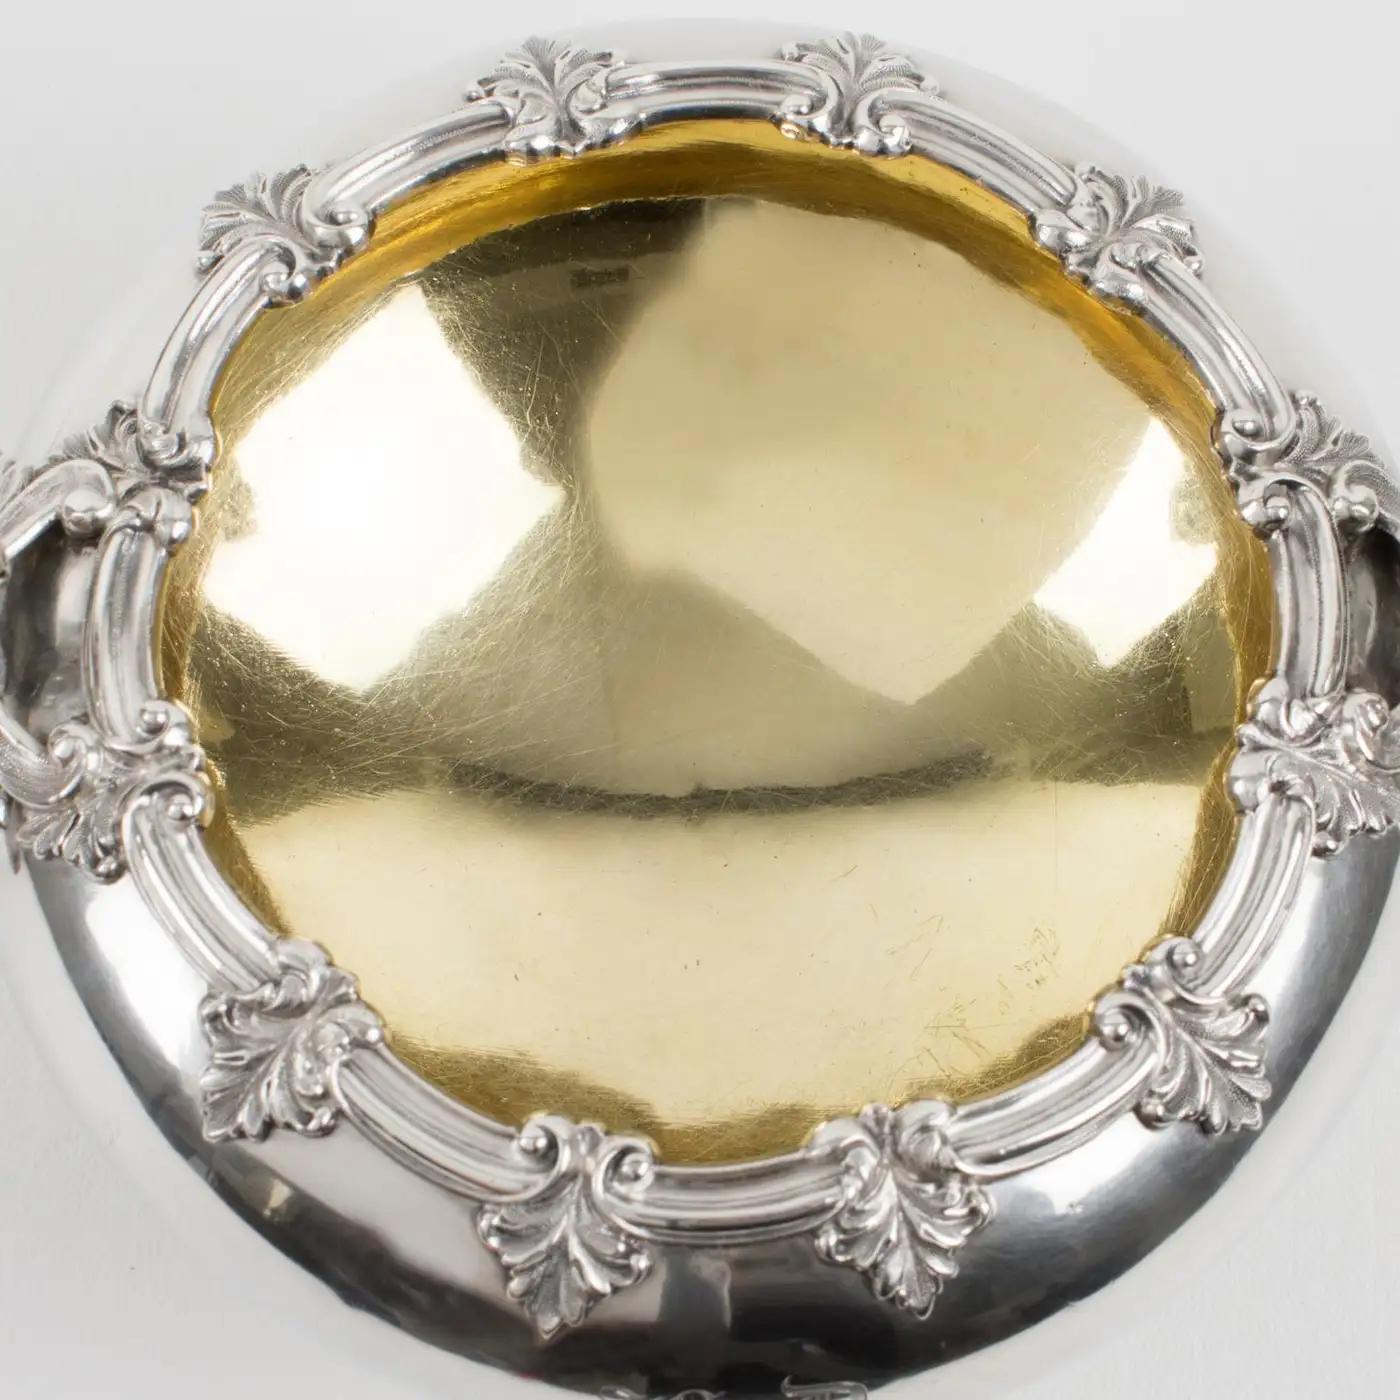 Gustave Odiot Paris 19th Century Sterling Silver Decorative Bowl For Sale 2